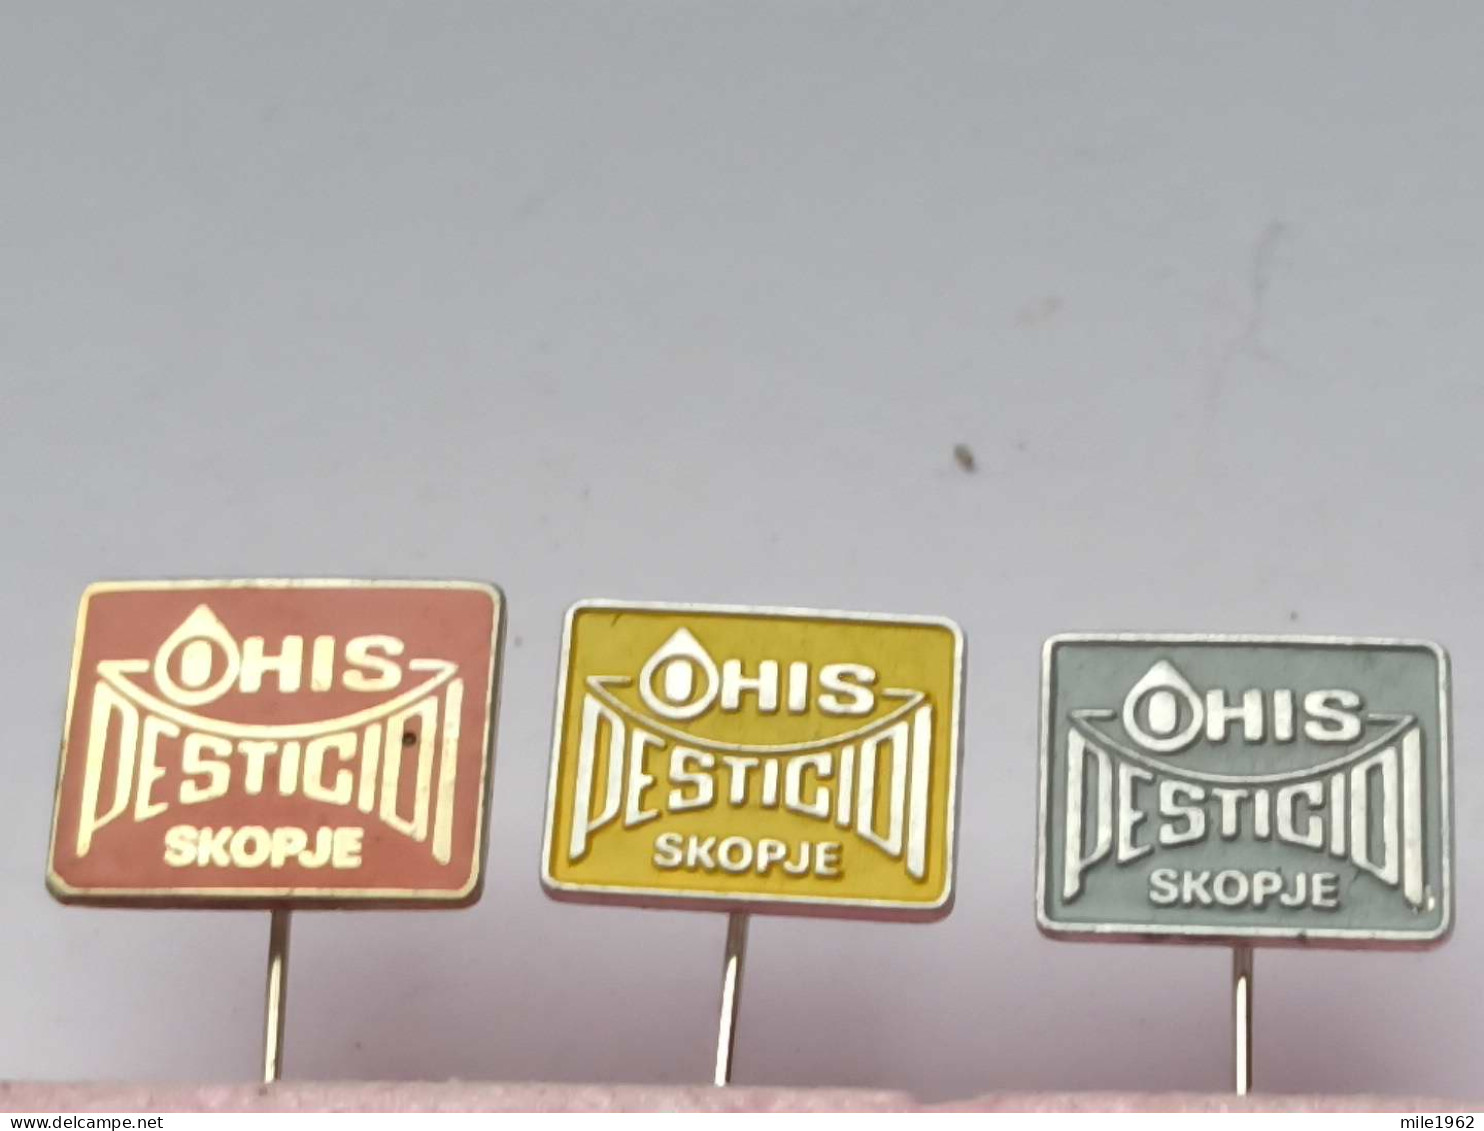 BADGE Z-98-6 - 3 PINS - OHIS PESTICIDI, SKOPJE, MACEDONIA CHEMICAL INDUSTRY, Agronomy, Agriculture Chemicals - Lots